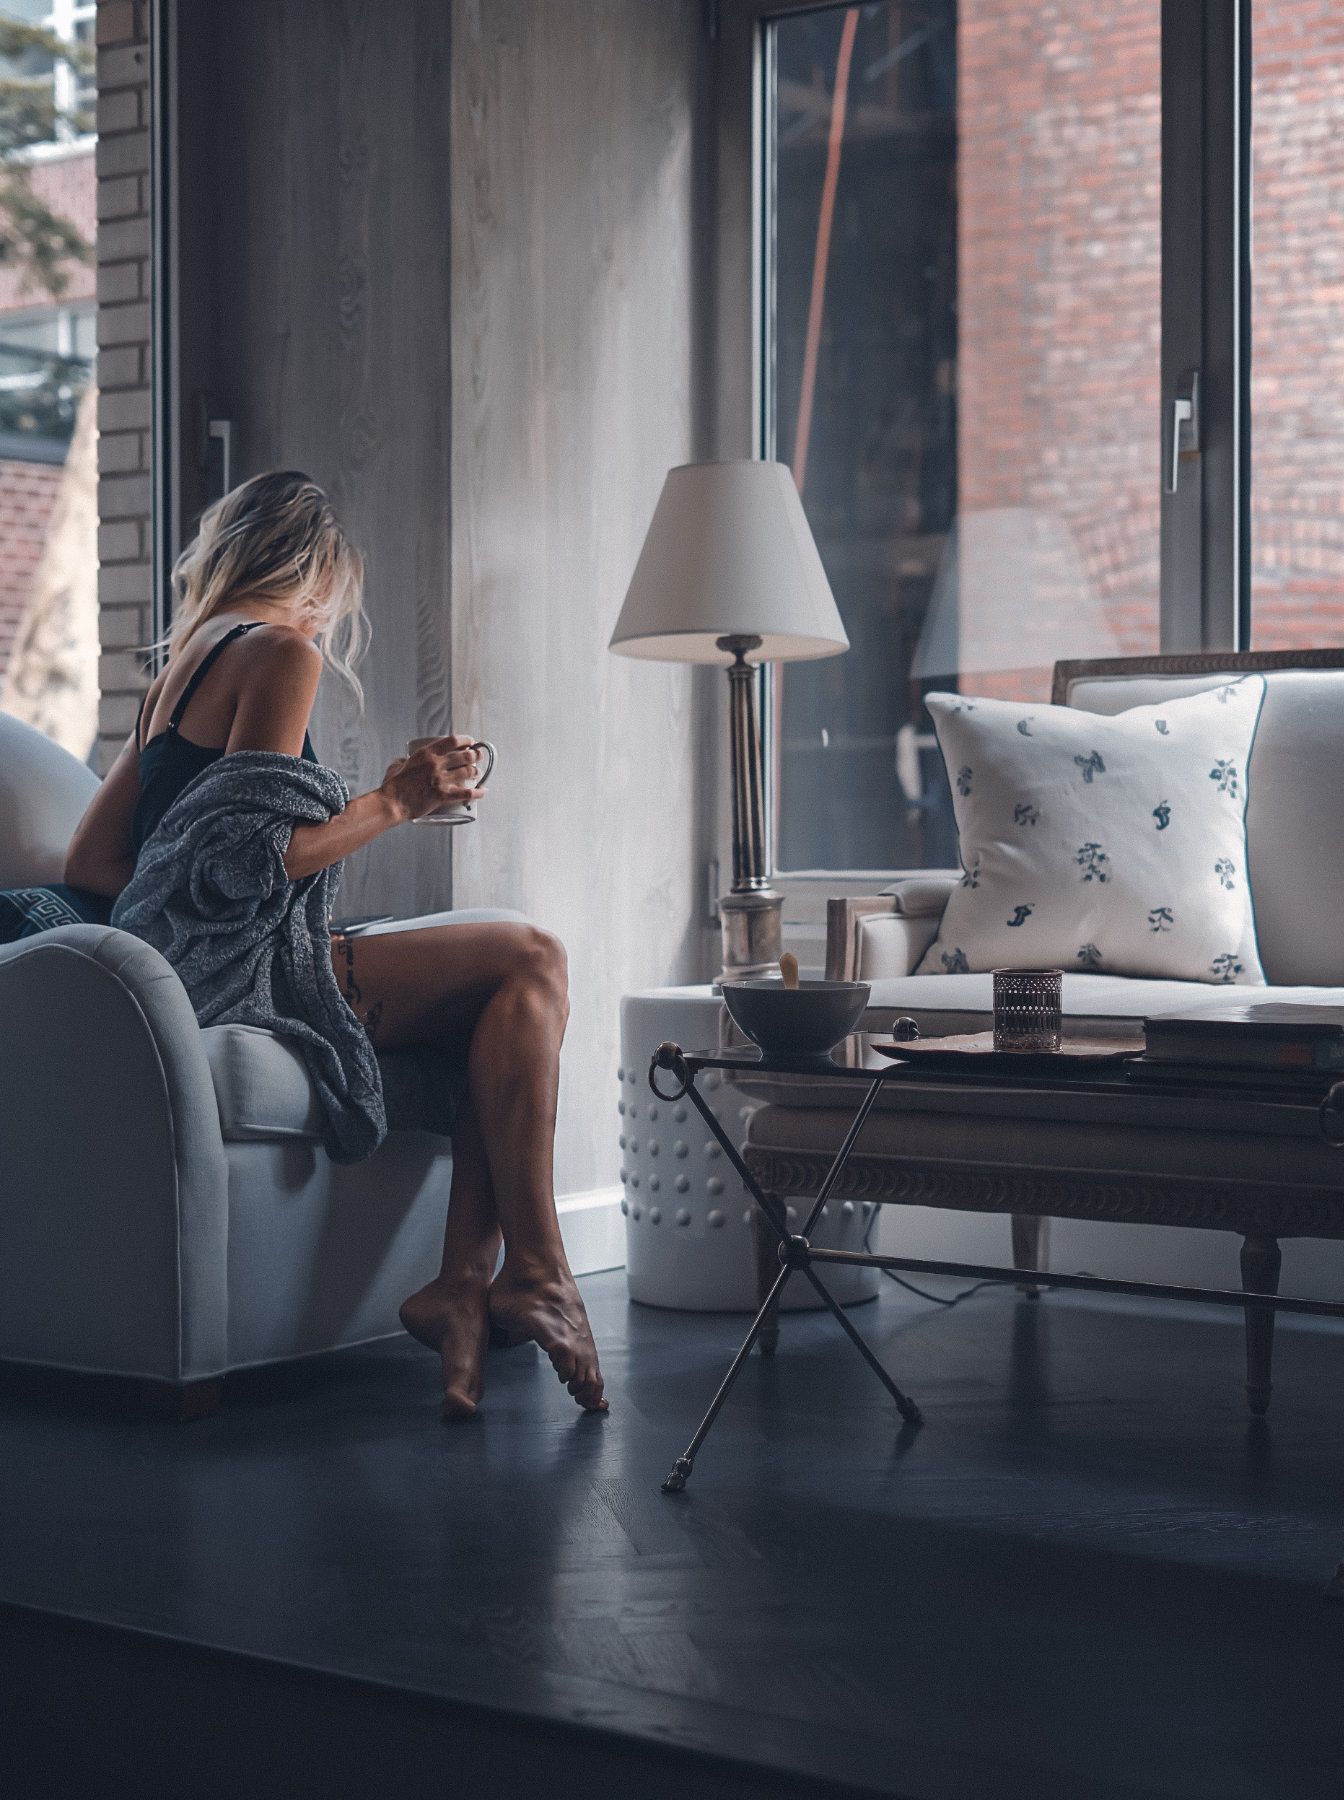 Luxury Real Estate Living Room with a Woman on the Sofa